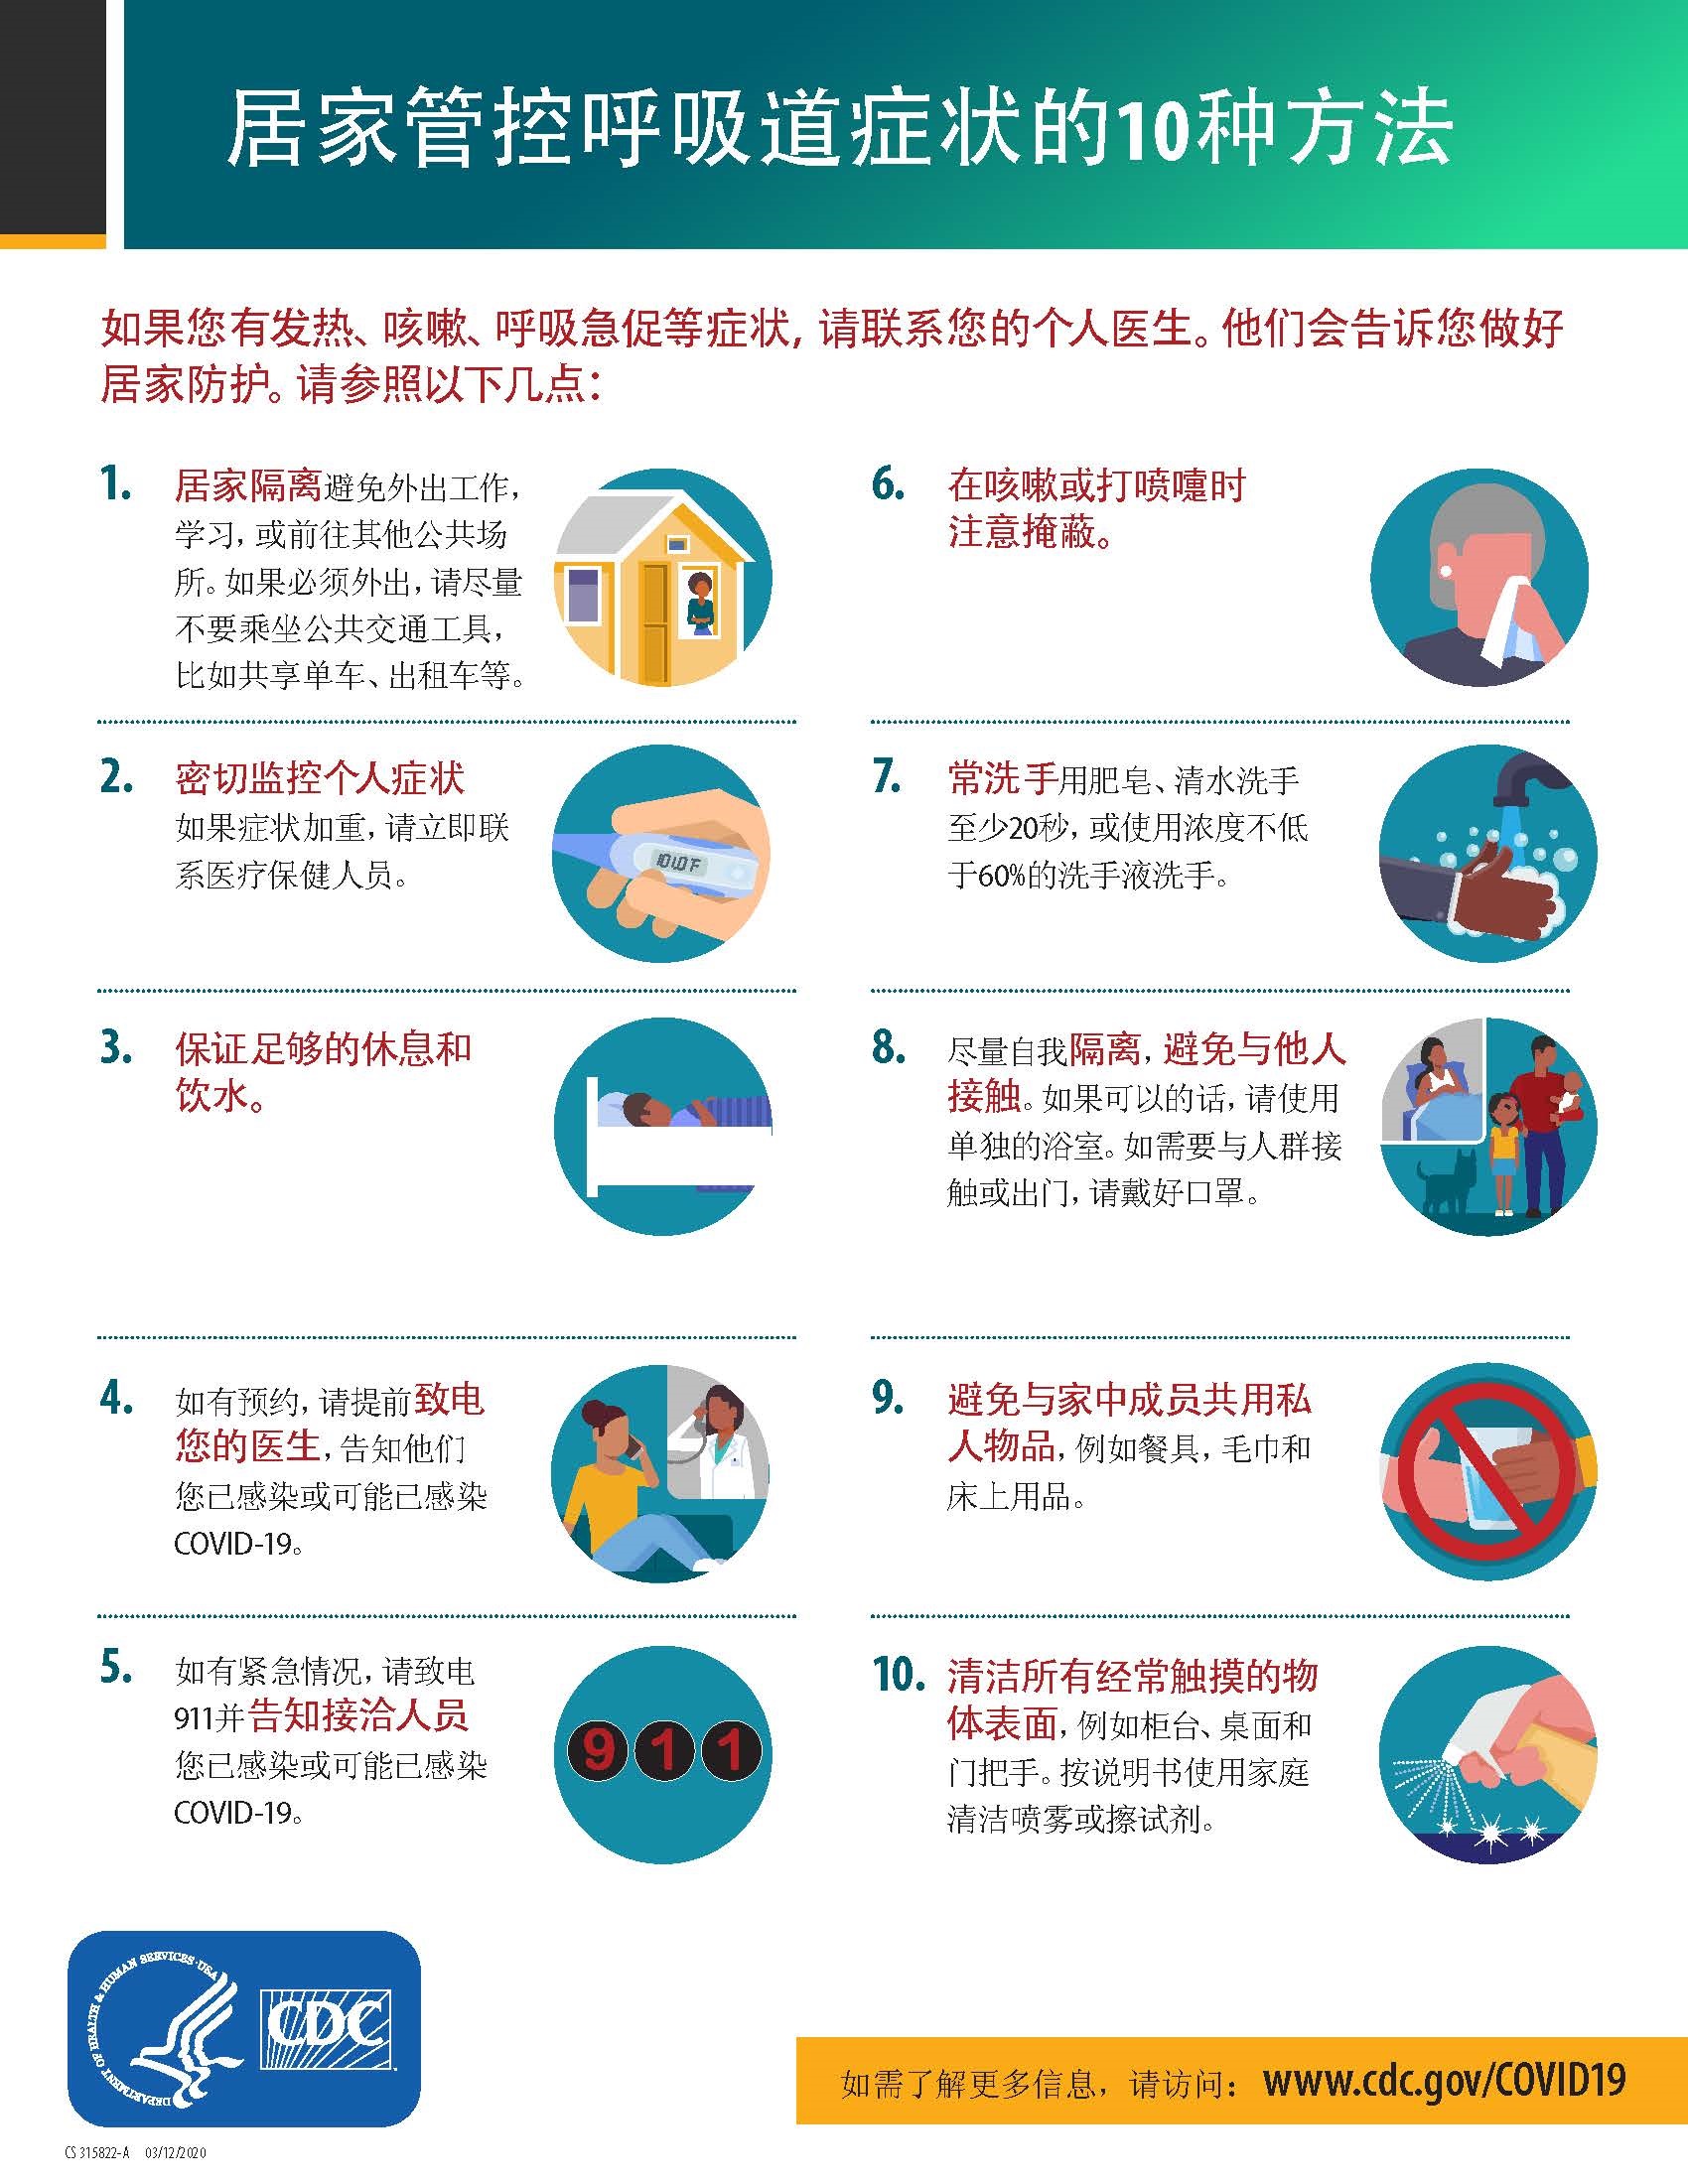 10 Ways to Manage Respiratory Symptoms at Home (Chinese)